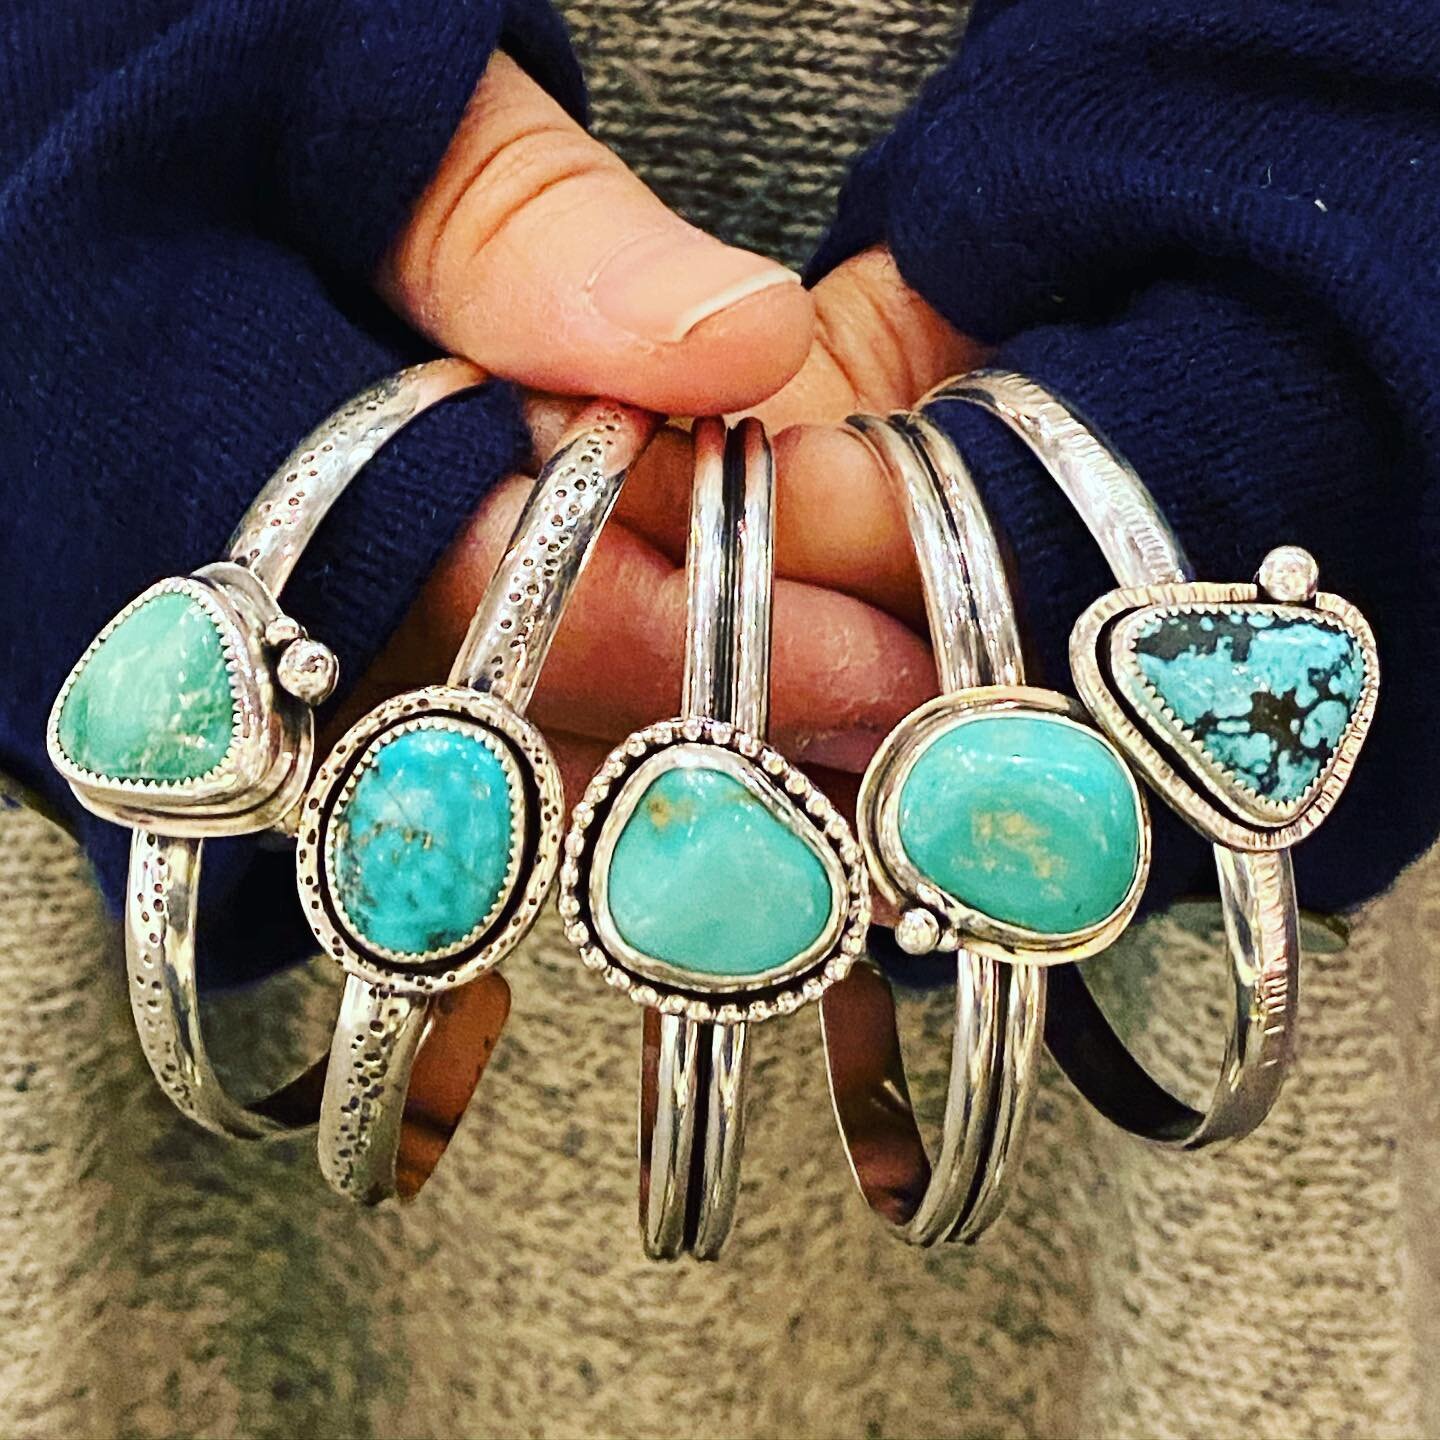 So happy I finished up a batch of these bad boys just in time for the start of the SoWa Winter Festival yesterday. There are 5 more in this little collection of cuffs and you really must see them in person to get the true impact of these amazingly be